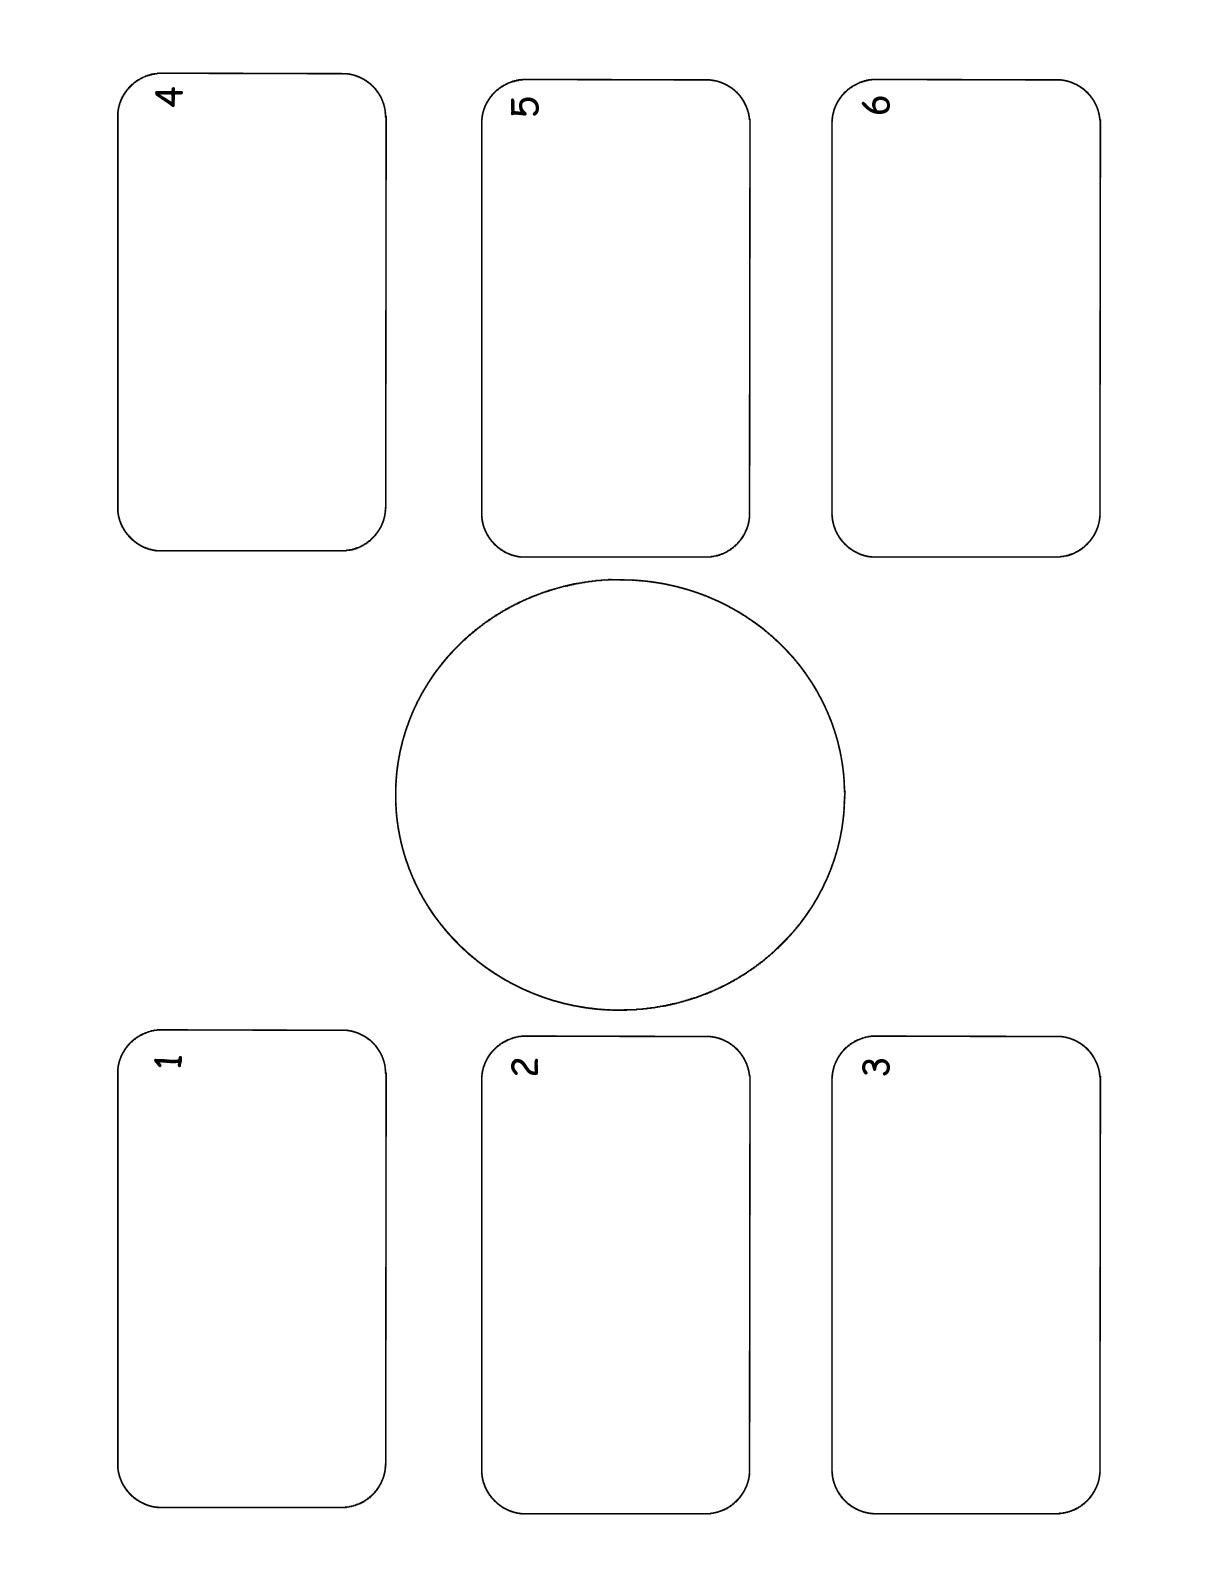 12-blank-graphic-organizers-images-printable-web-graphic-organizer